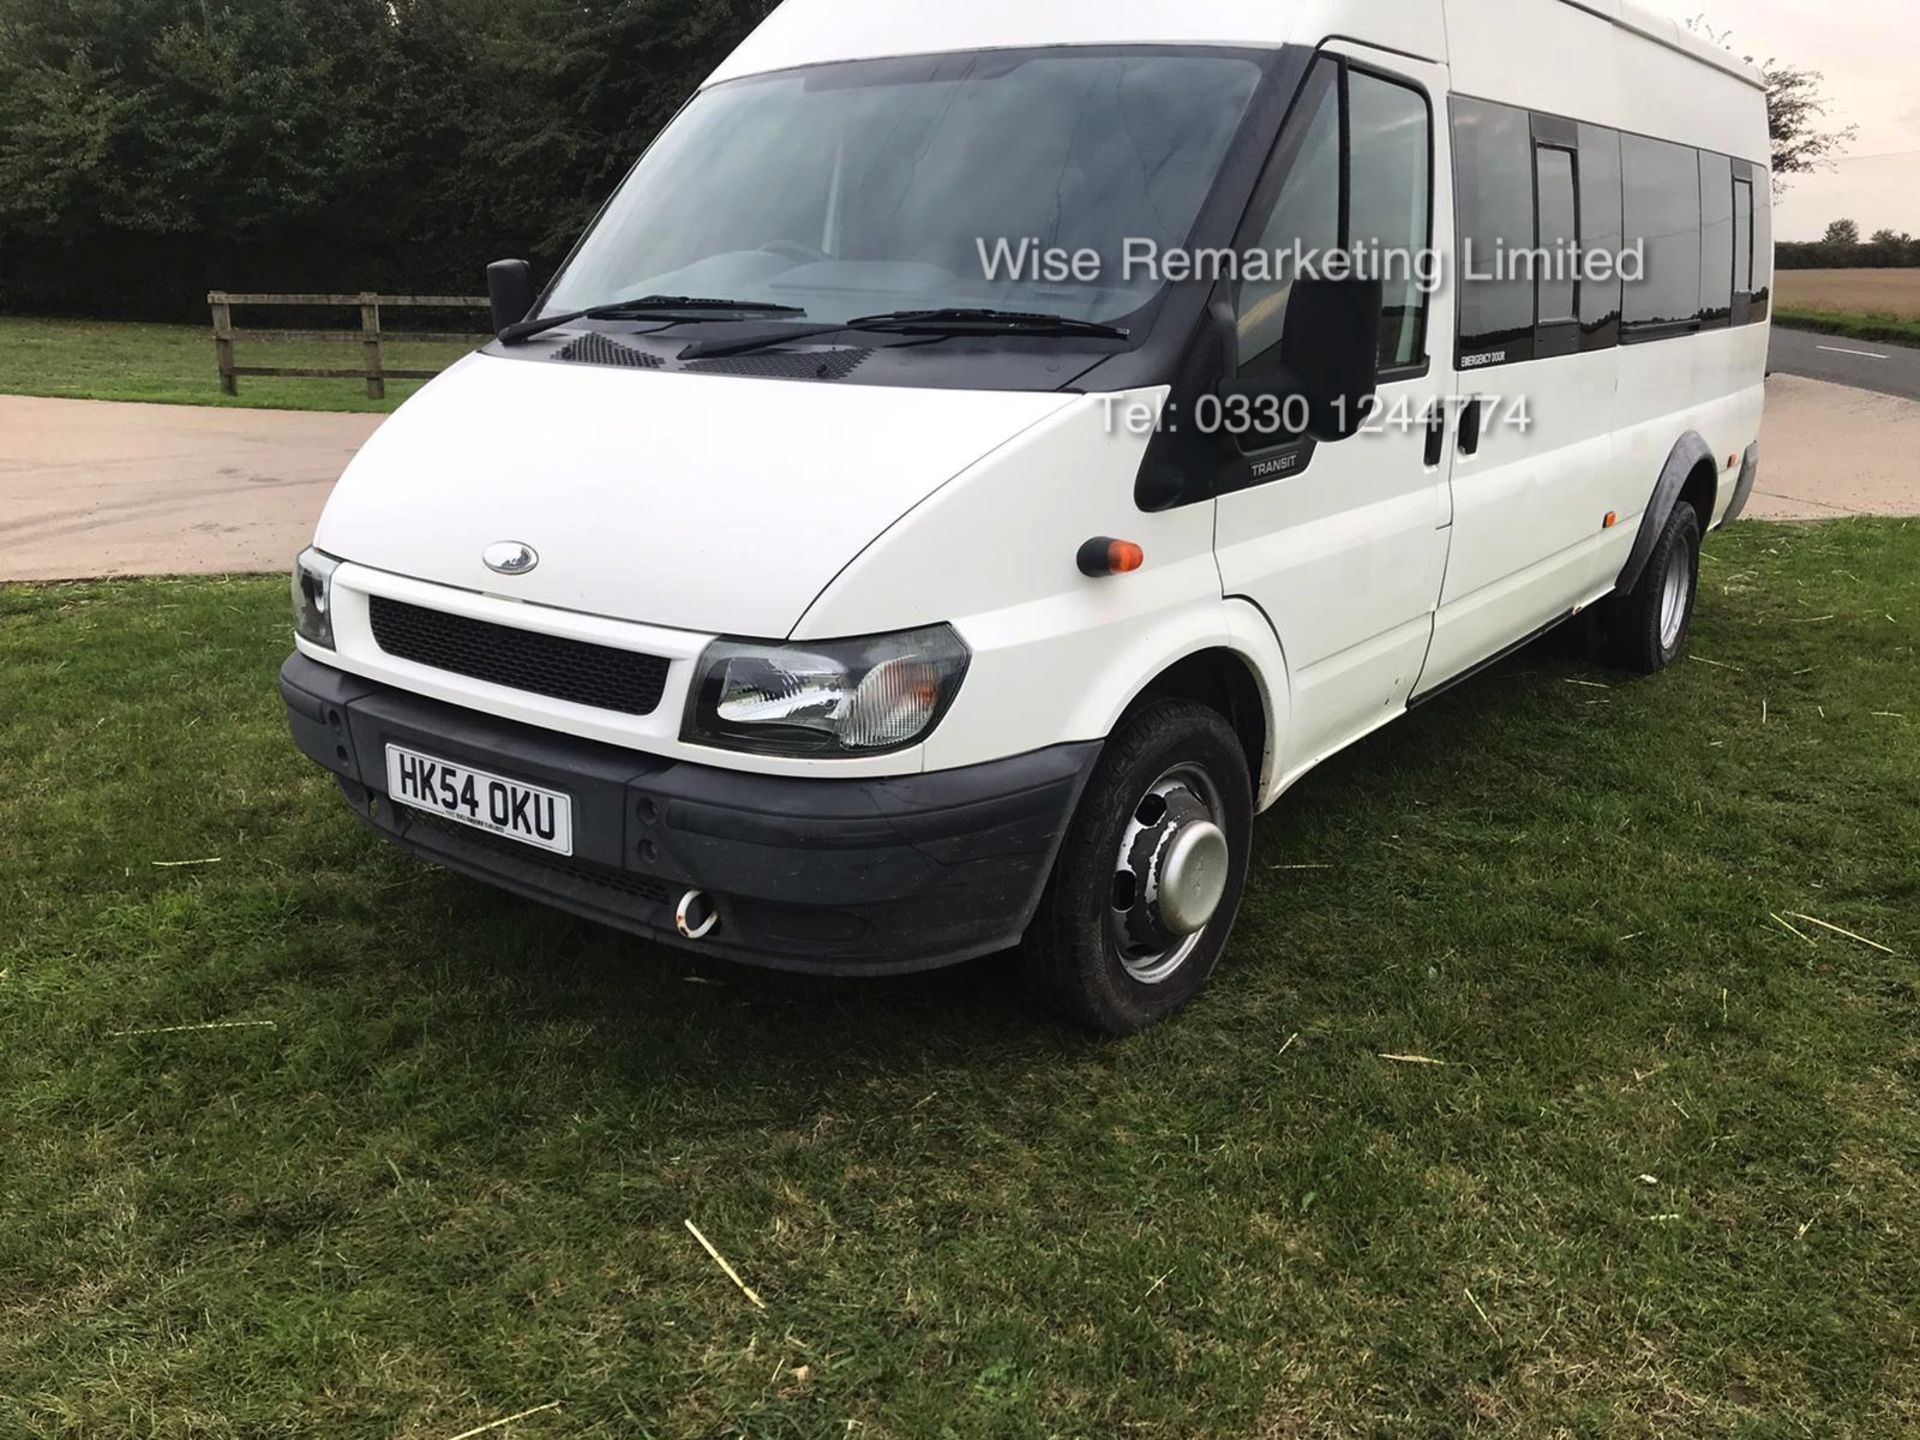 Ford Transit Minibus 2.4l (17 Seater) - 2005 Model - Service History - 1 Keeper - Only 31k Miles - Image 3 of 22